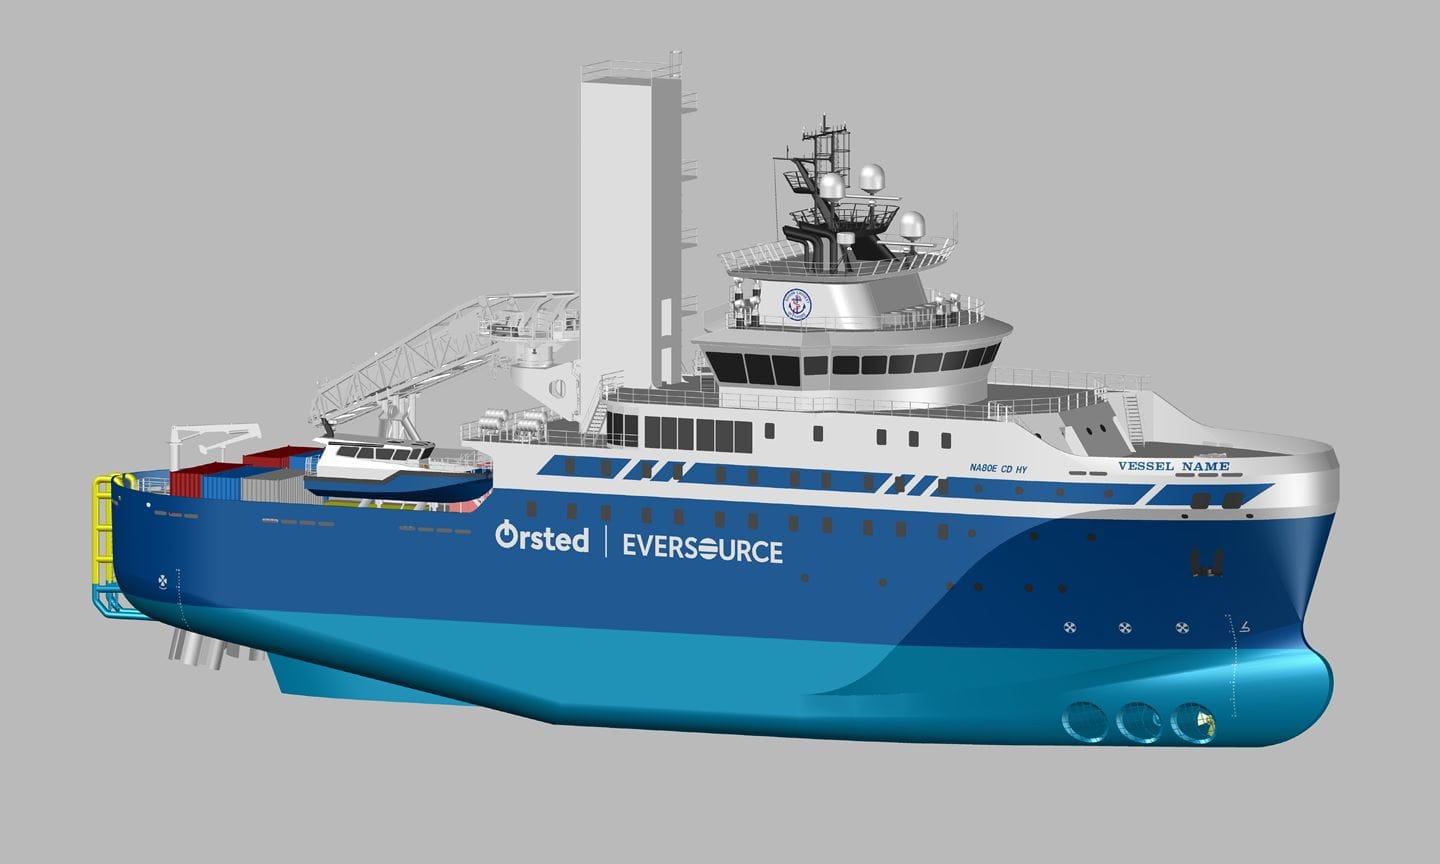 Edison Chouest Offshore to Build and Operate First Large Jones Act-Compliant Offshore Wind Vessel